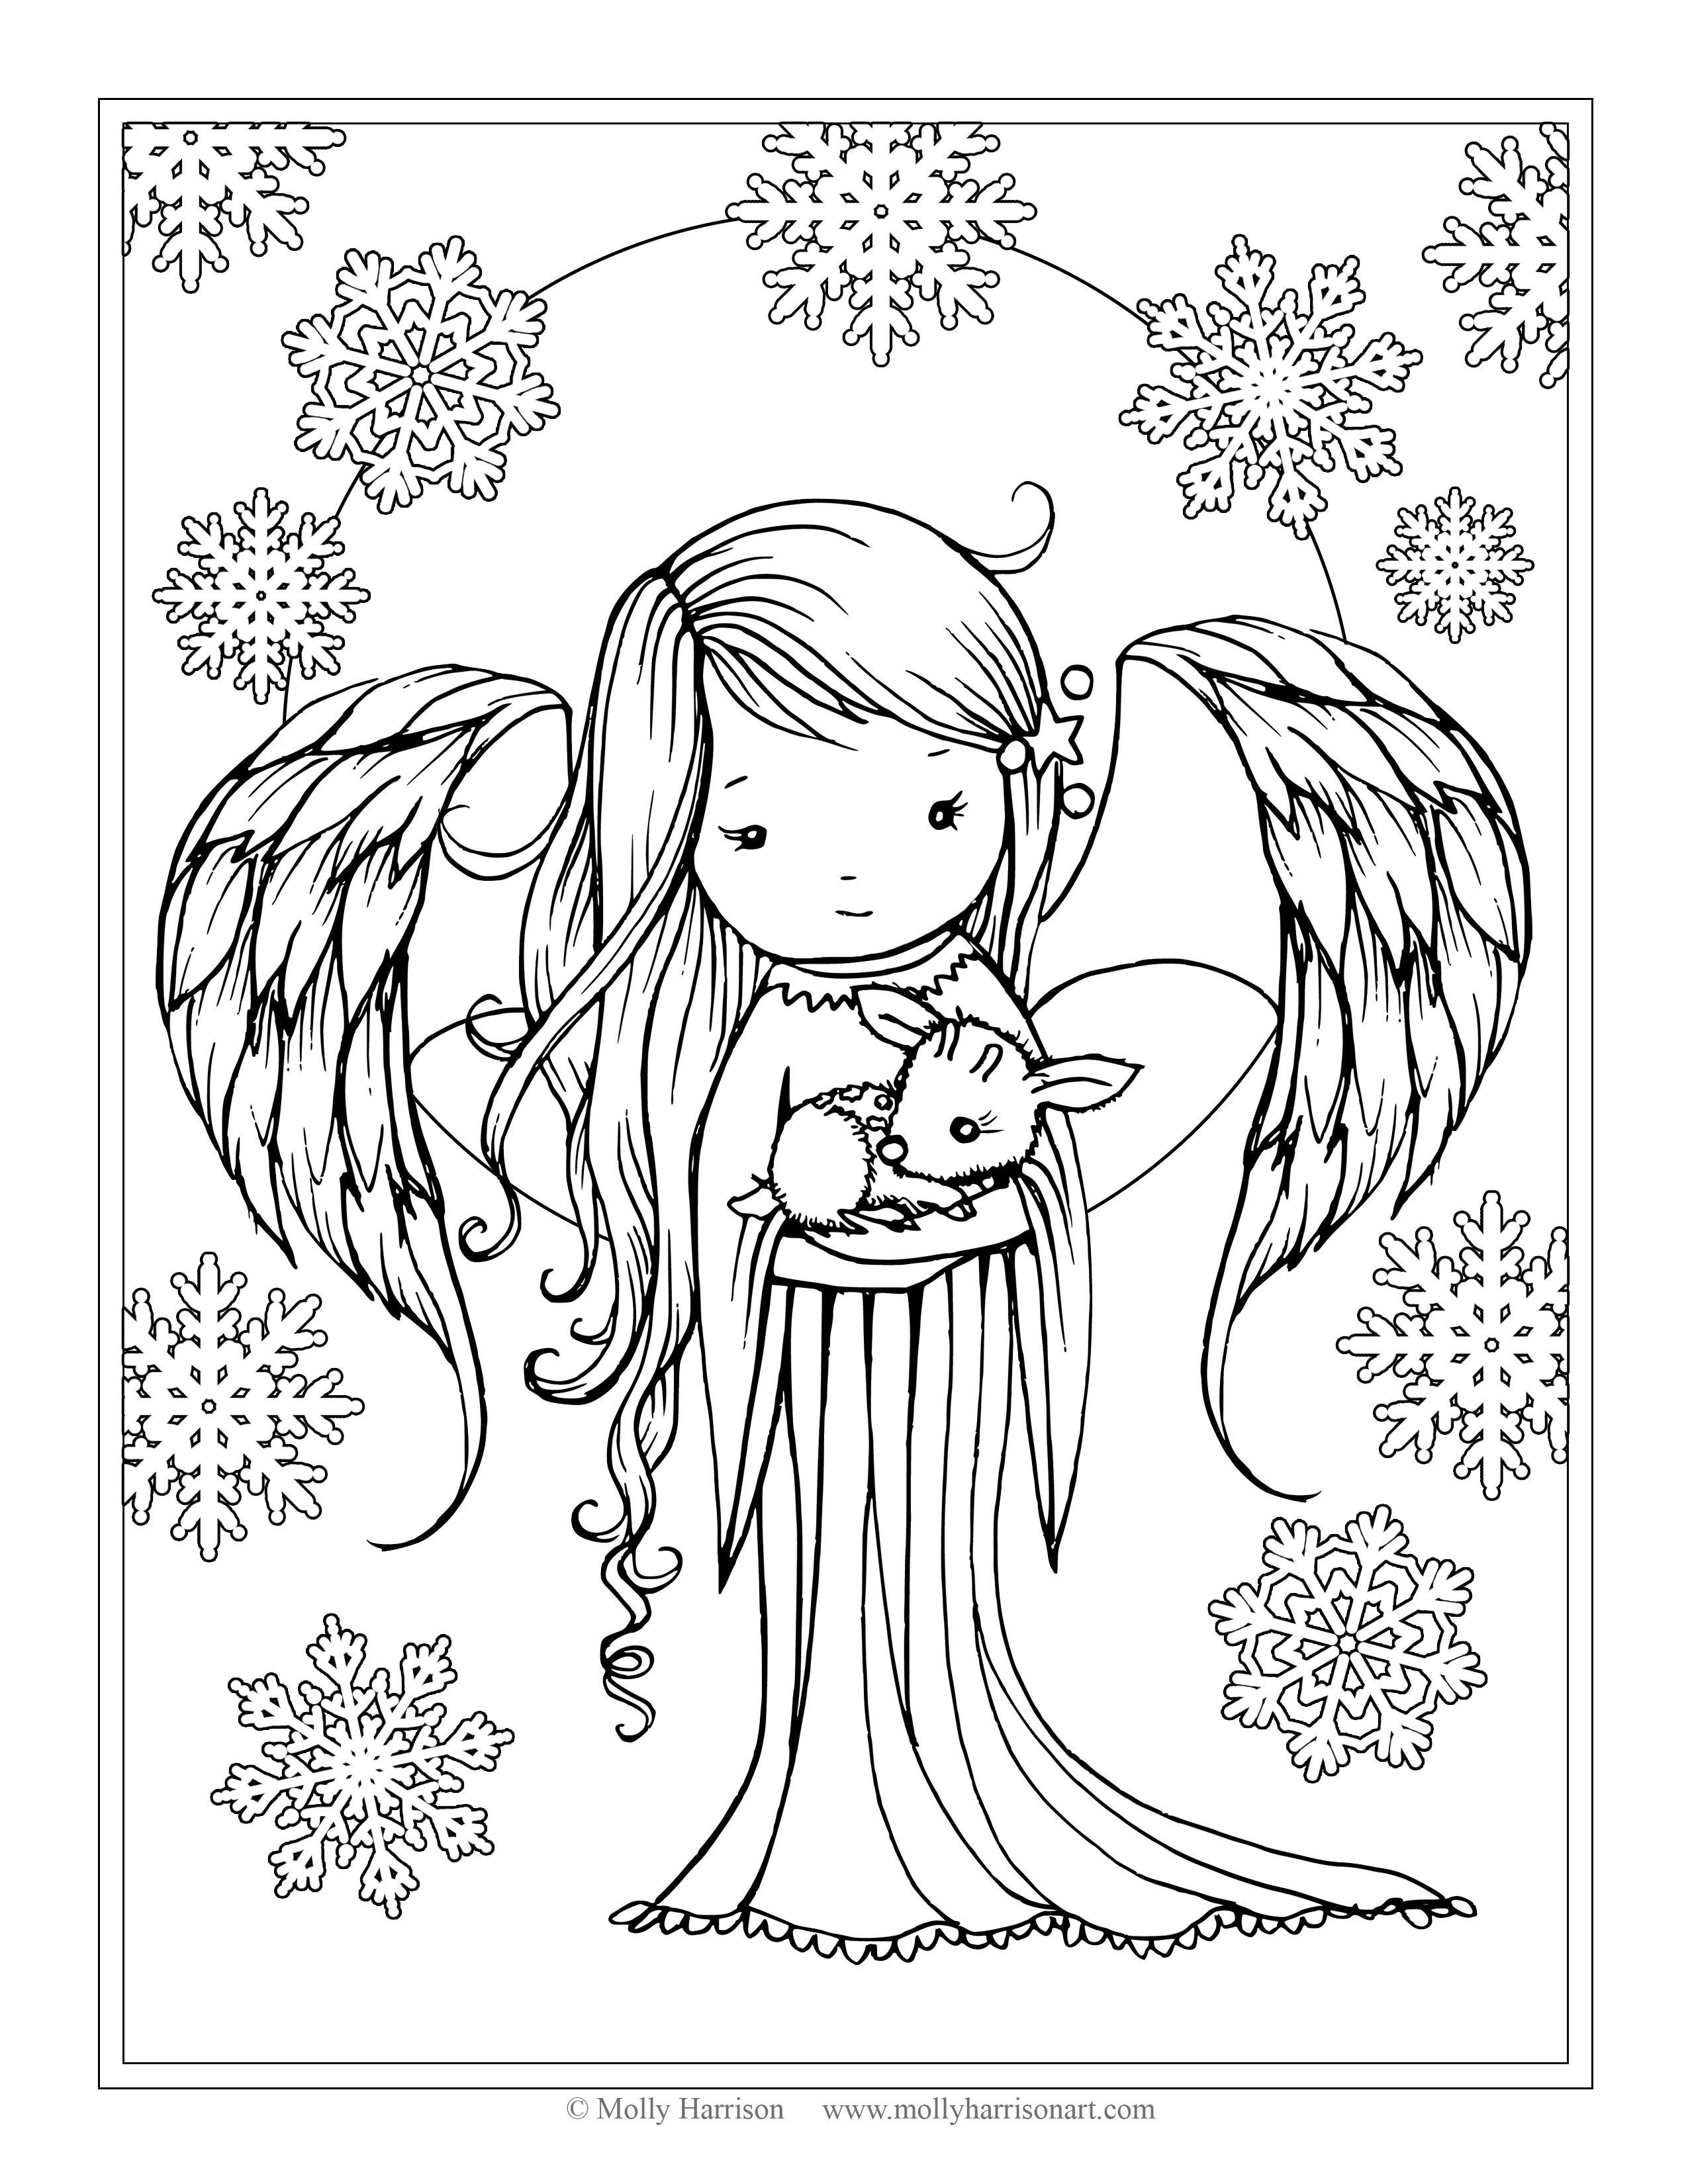 Winter Wonderland Free Coloring Sheets
 Angel holding Fawn from the book "Whimsical Winter